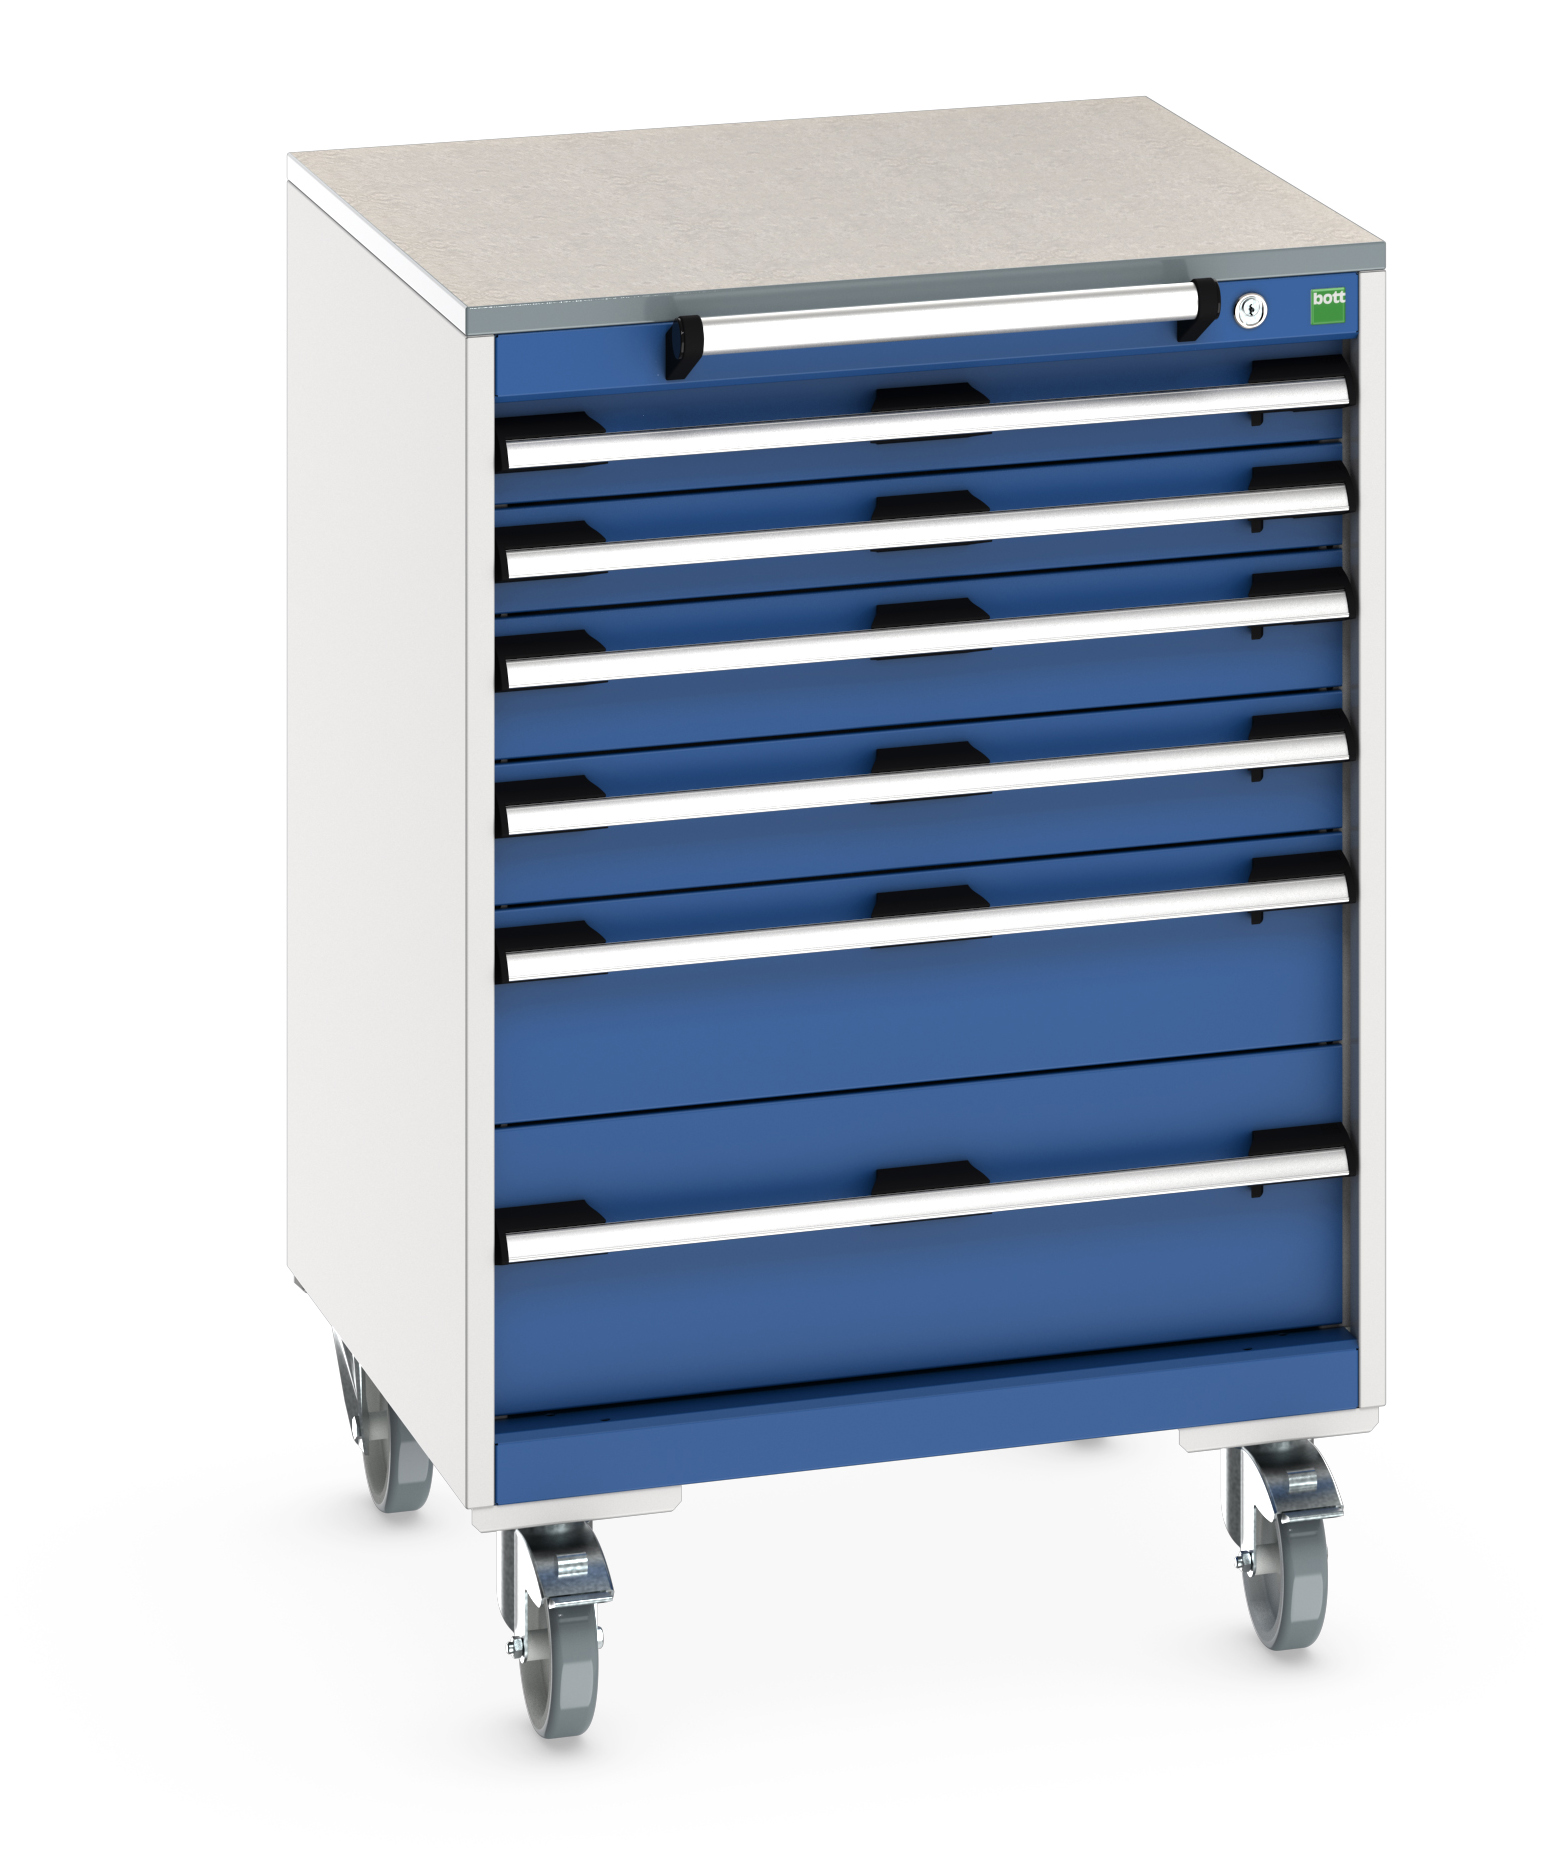 Bott Cubio Mobile Drawer Cabinet With 6 Drawers & Lino Worktop - 40402152.11V